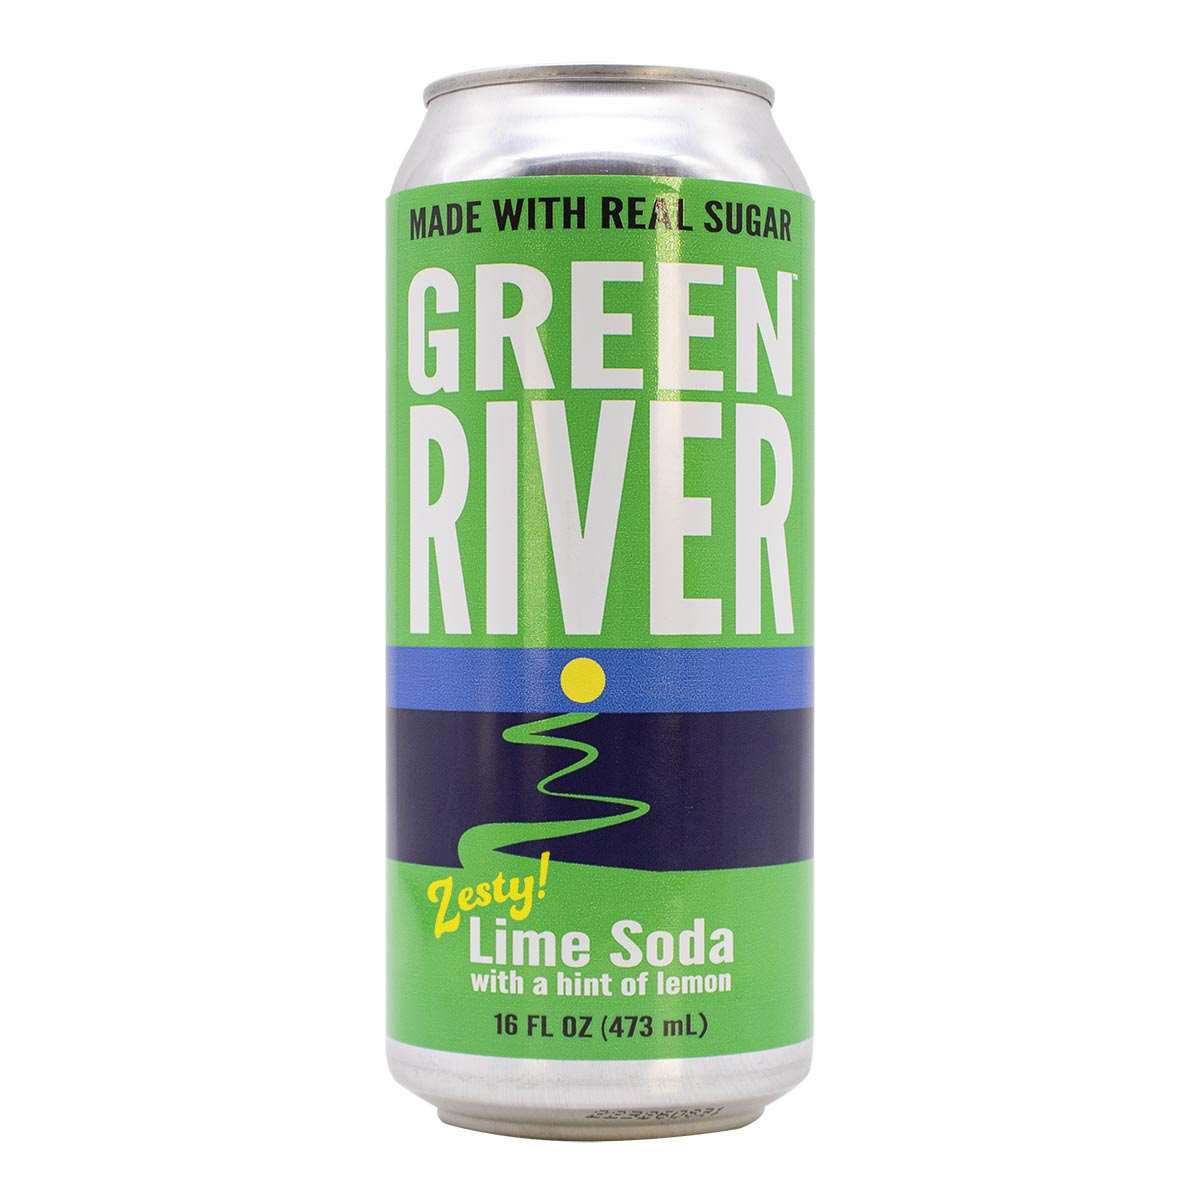 A green river can on a white background